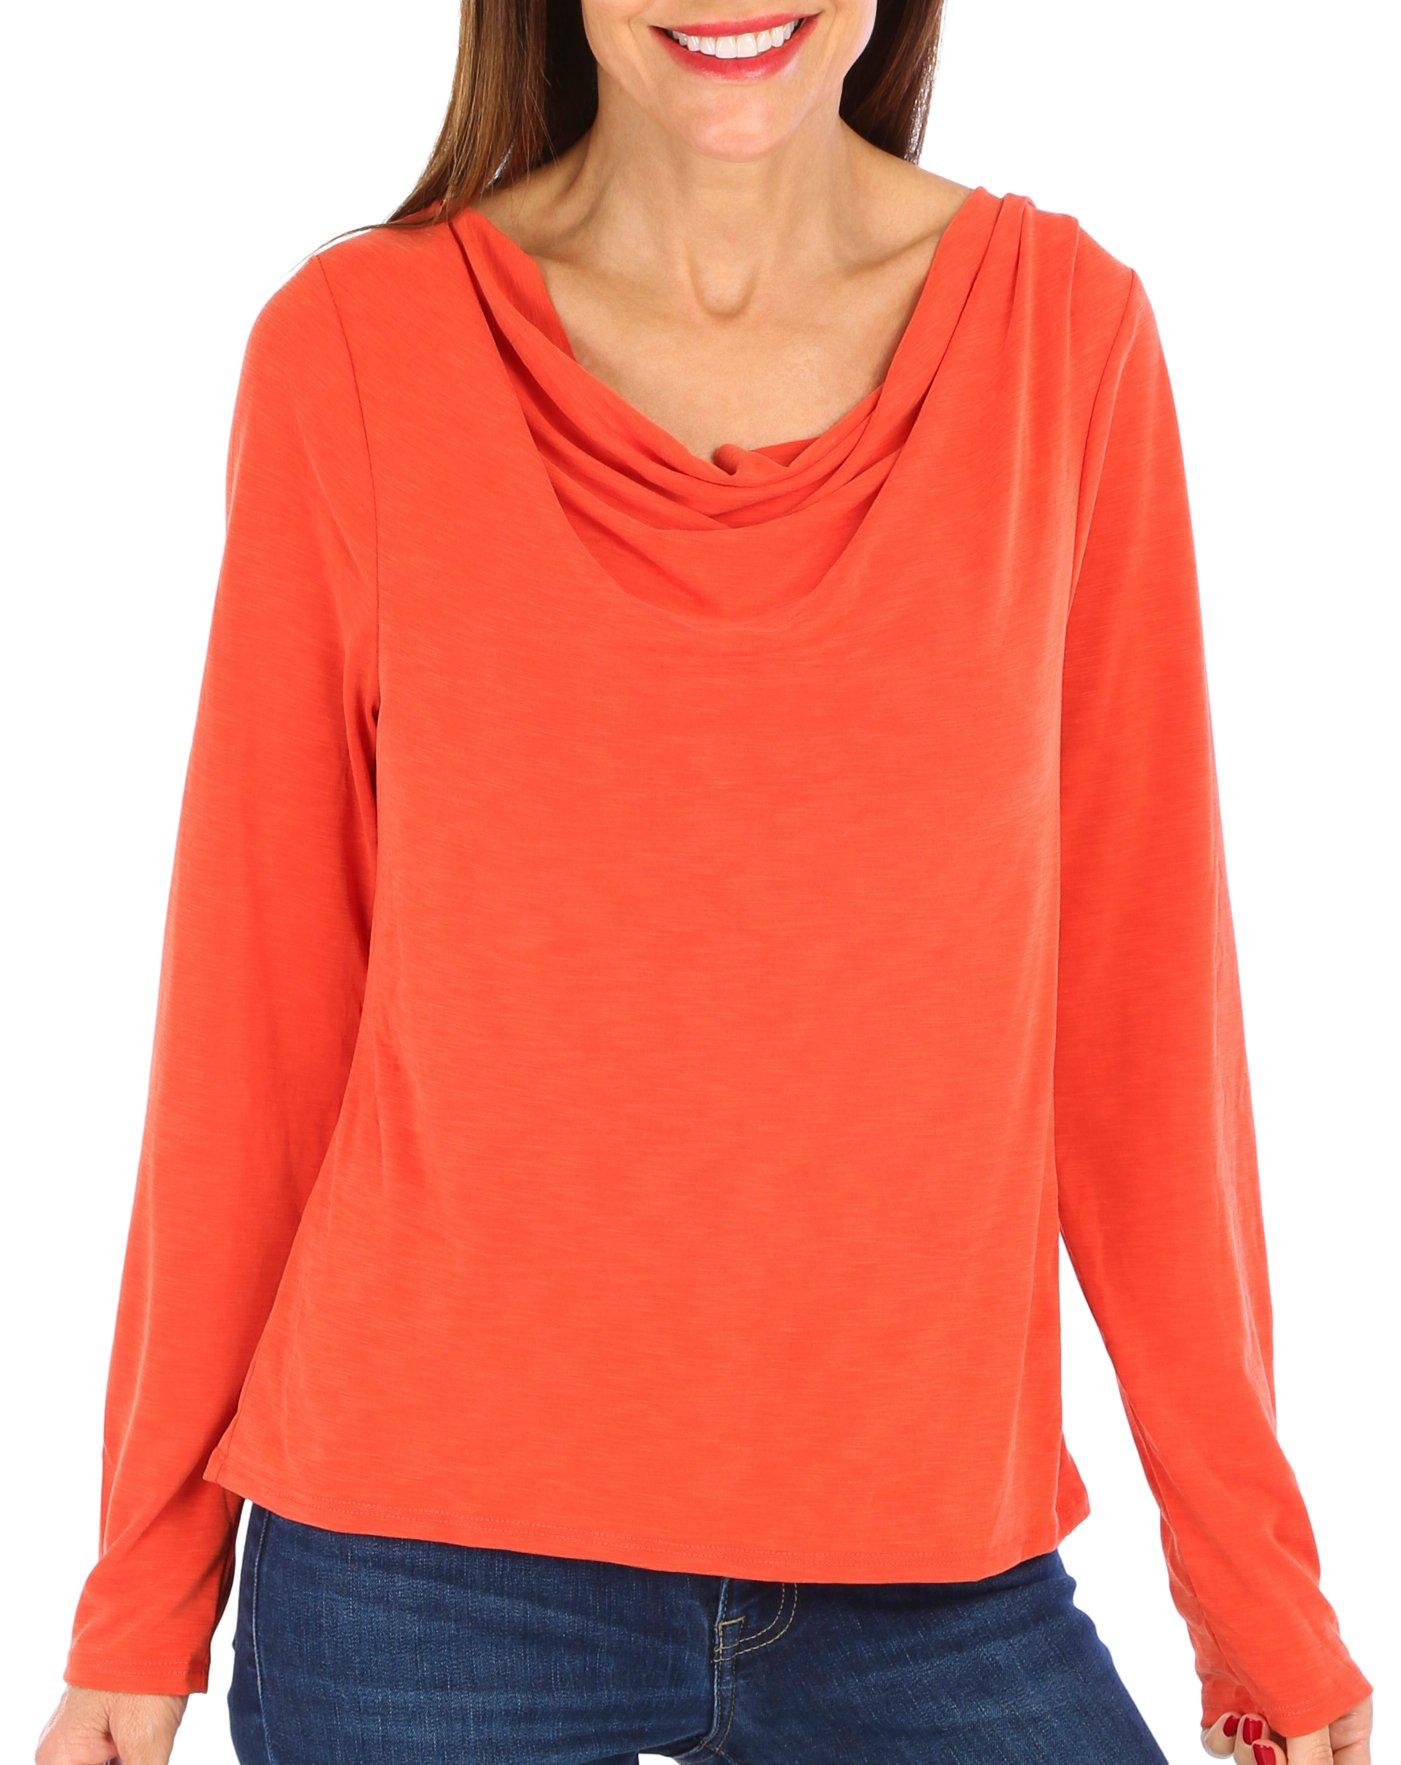 Womens Cowl Neck Long Sleeve Top